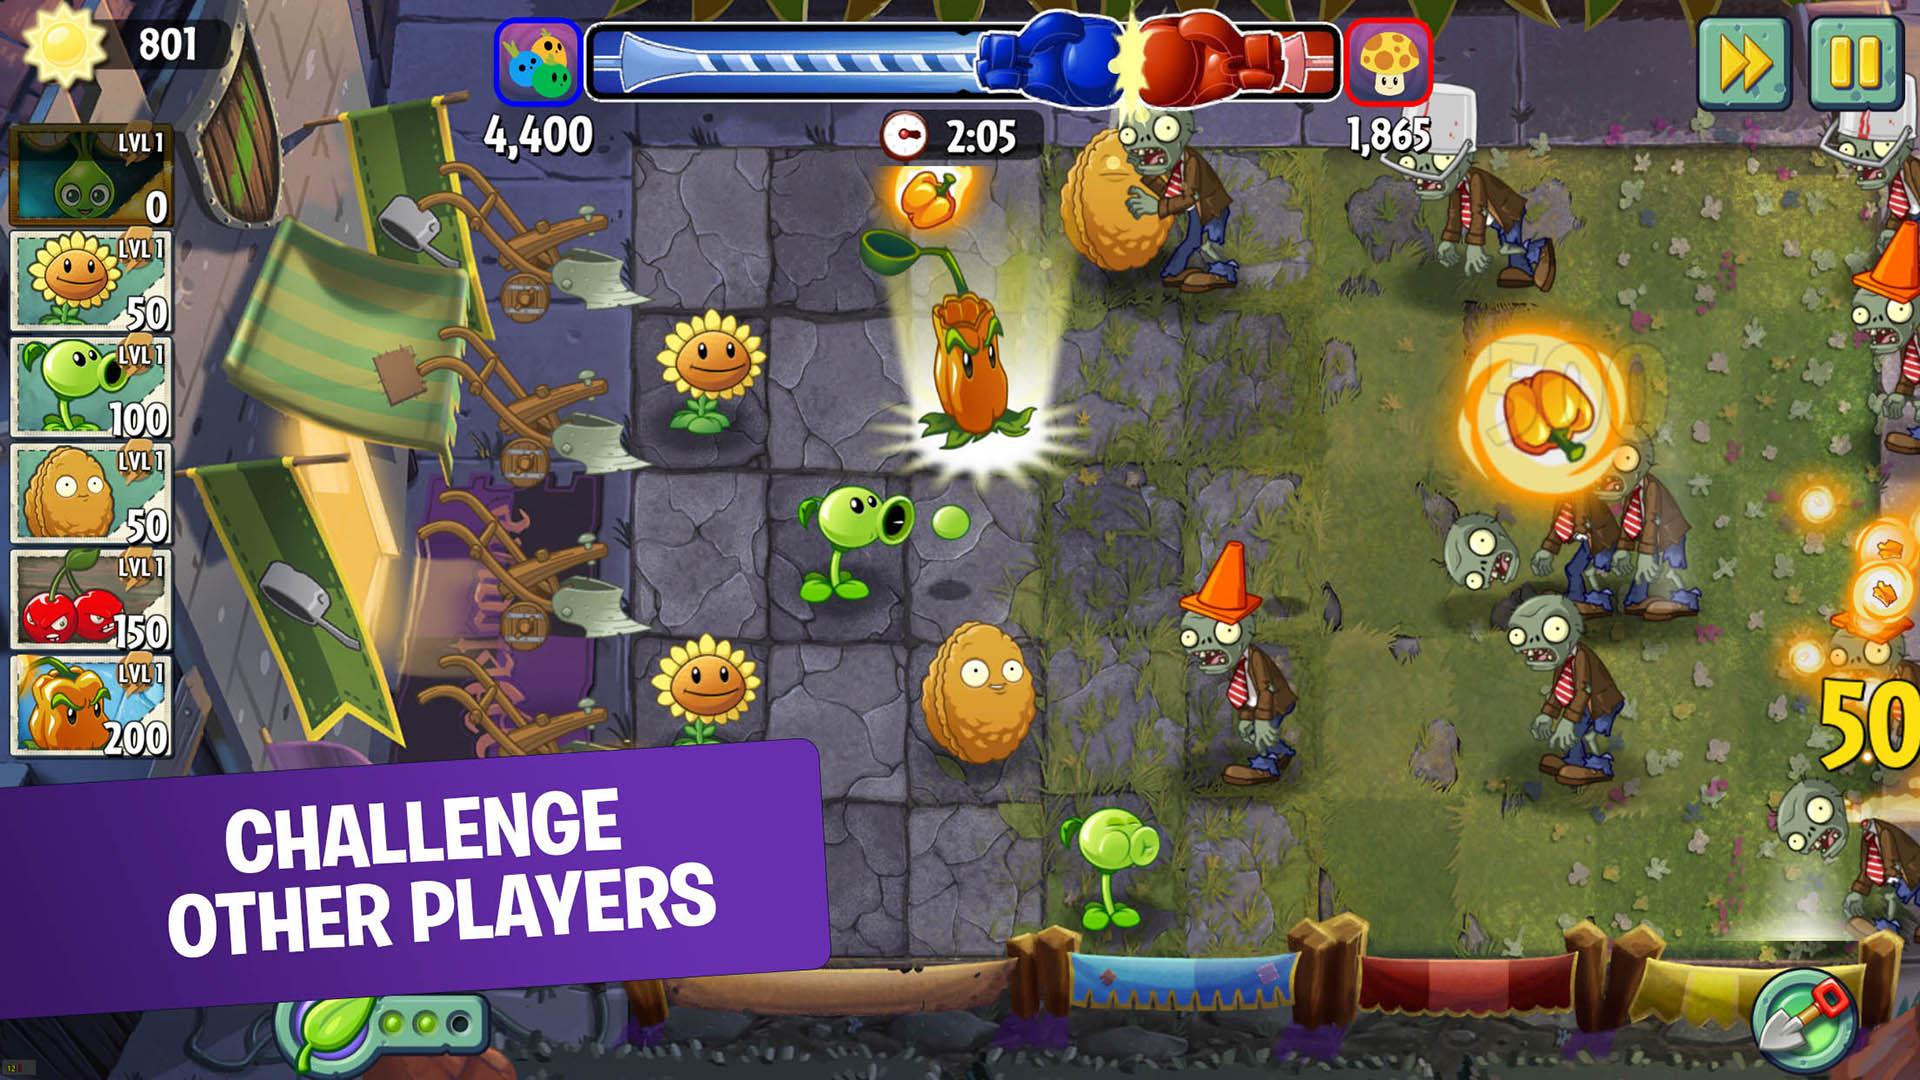 Plants vs. Zombiesâ„¢ 2 Free for Android - APK Download - 